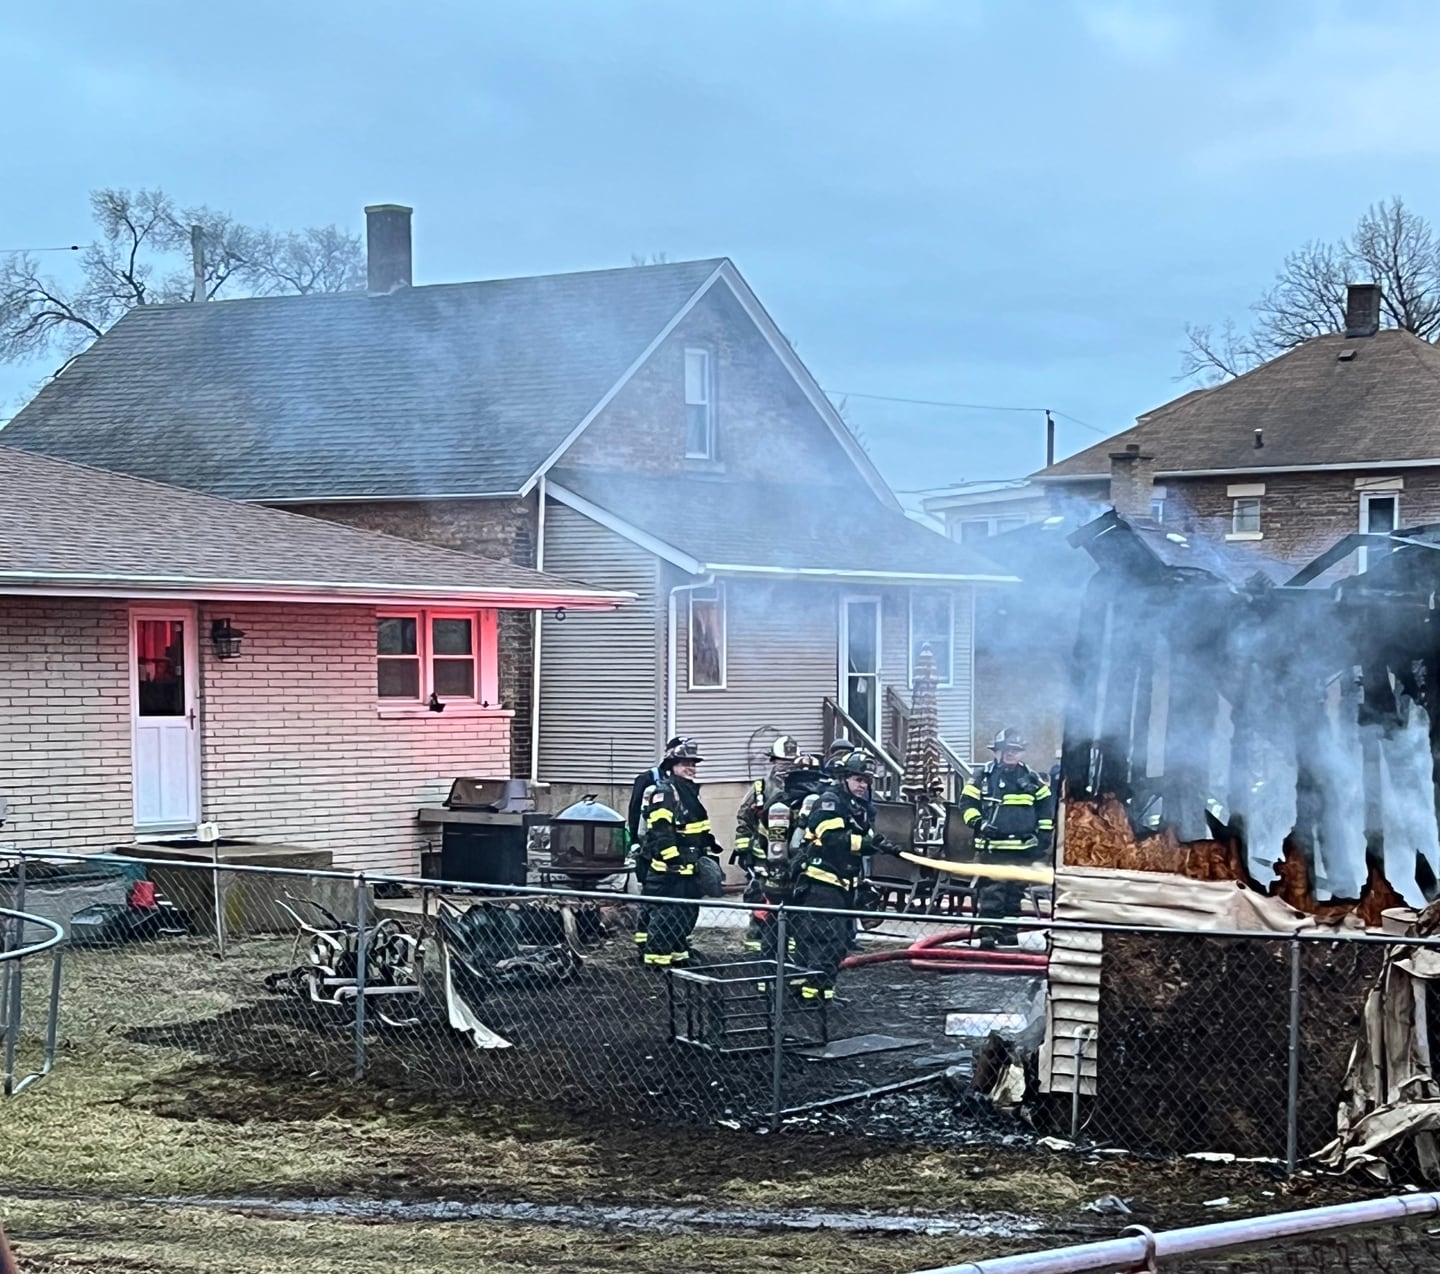 Firefighters put out a fire on Wednesday at a detached garage in the 200 block of Davis Avenue in Rockdale.